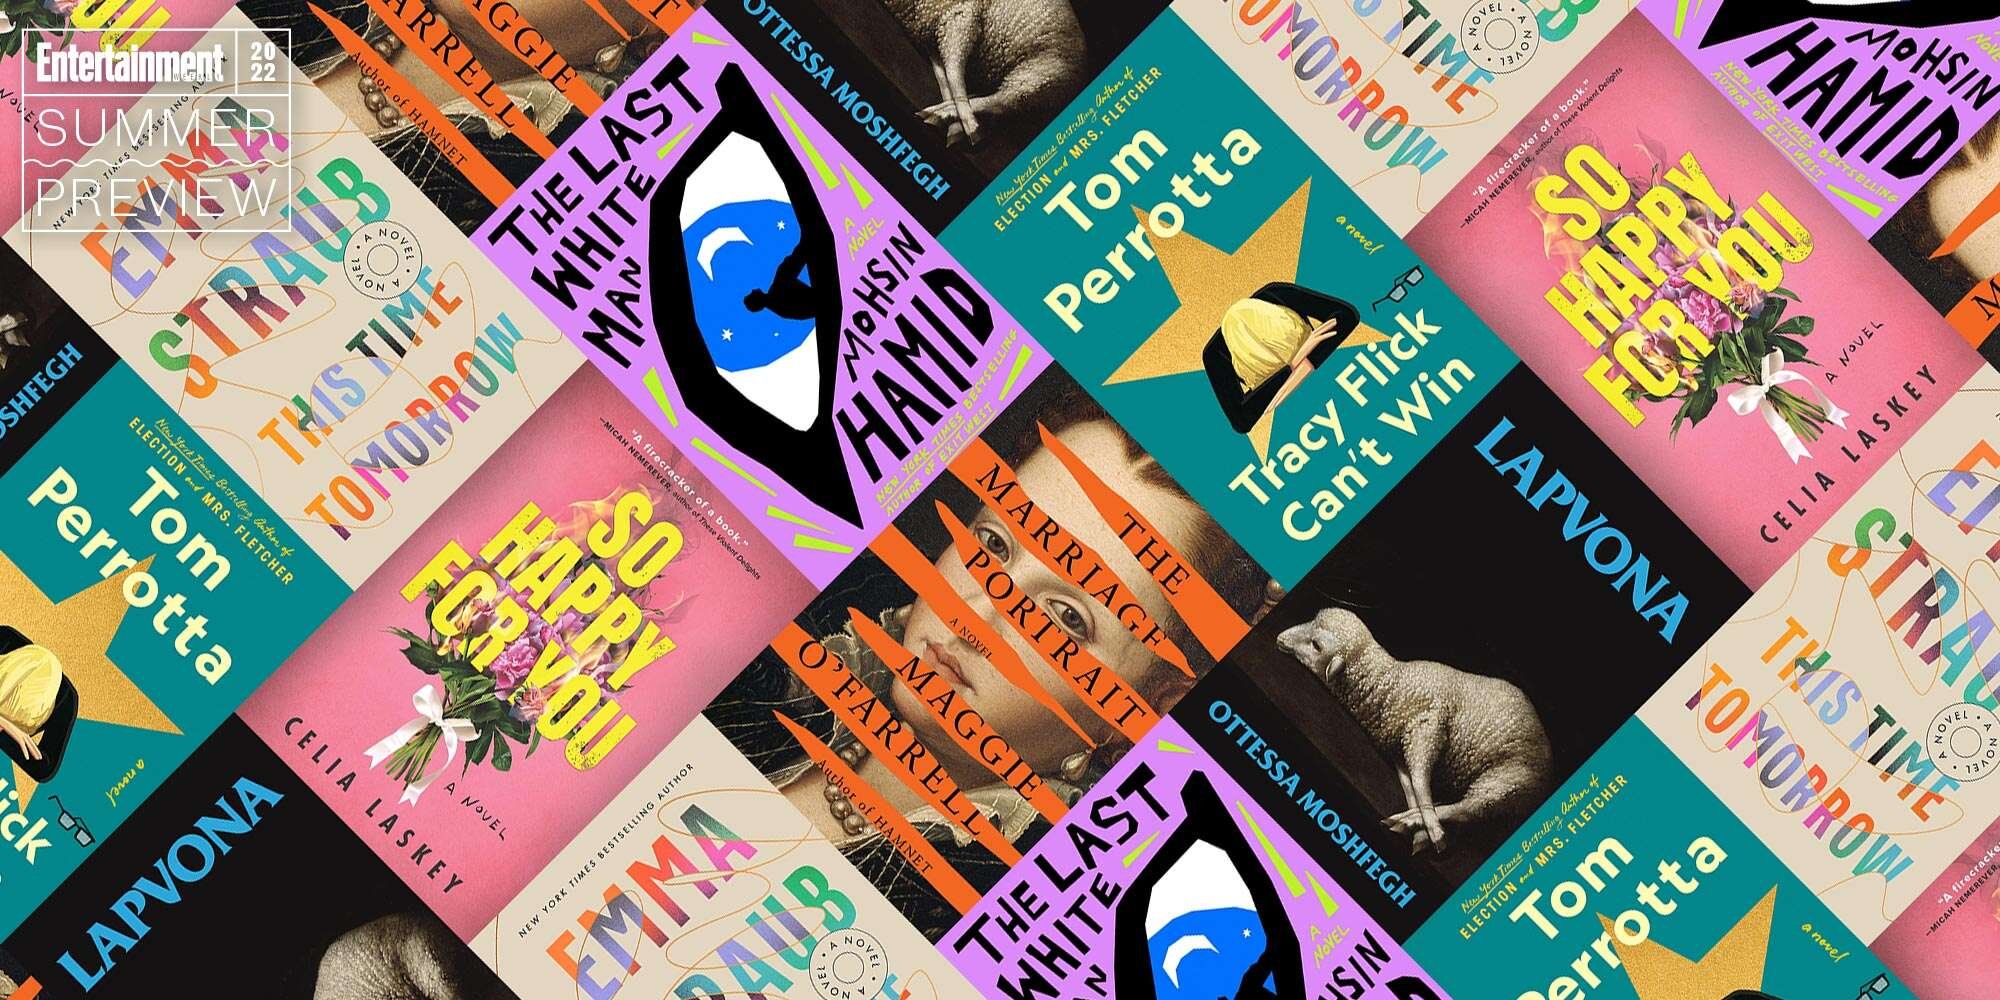 16 novels we're excited for this summer